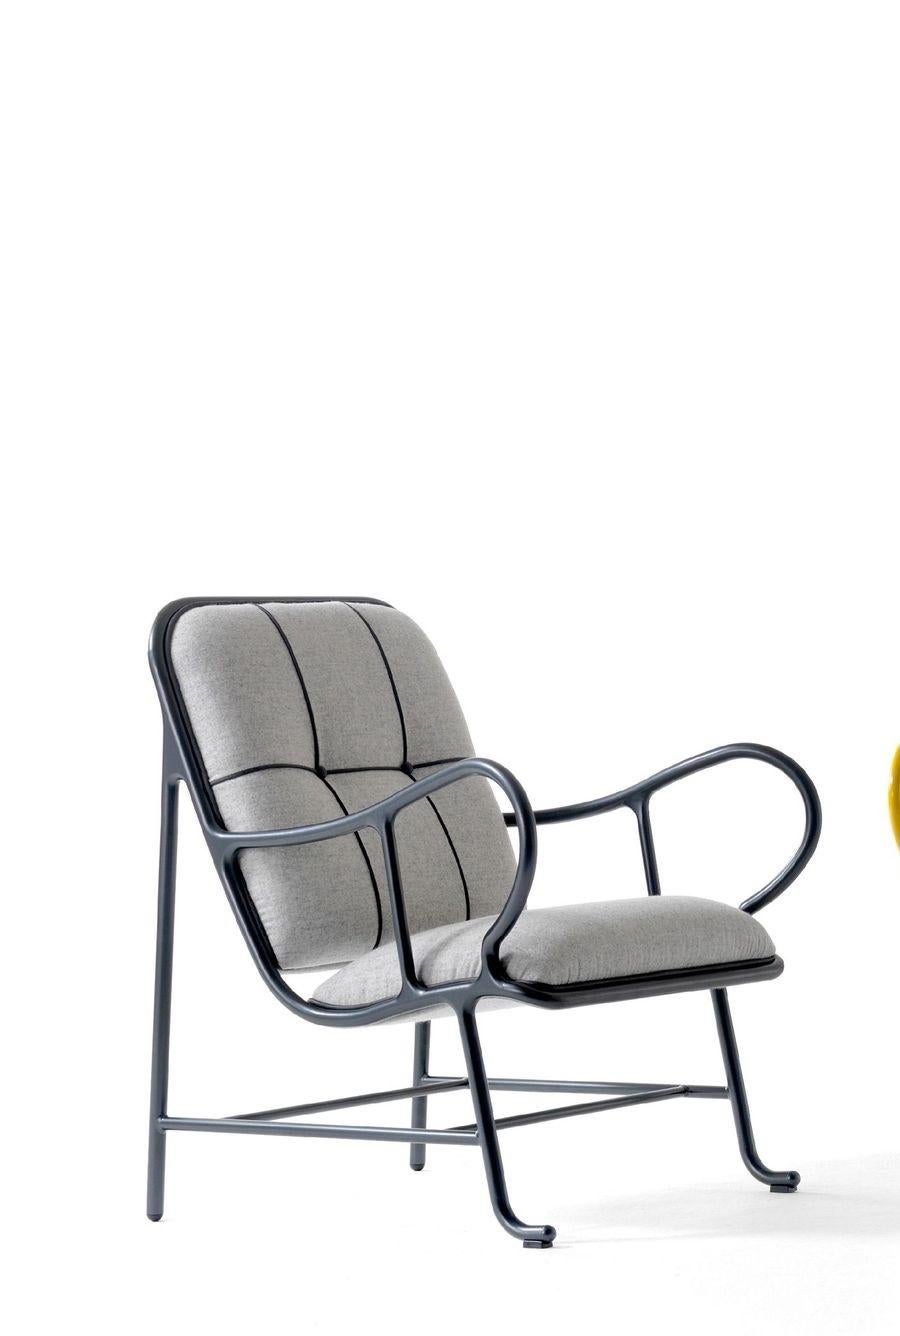 Indoor Gardenia armchair by Jaime Hayon 
Dimensions: D 89 x W 70 x H 100 cm 
Materials: structure in cast aluminum and laminates in extruded aluminum. Powder coating in Alesta Anodic Black or in high-gloss yellow (RAL 1005). Seat and backrest